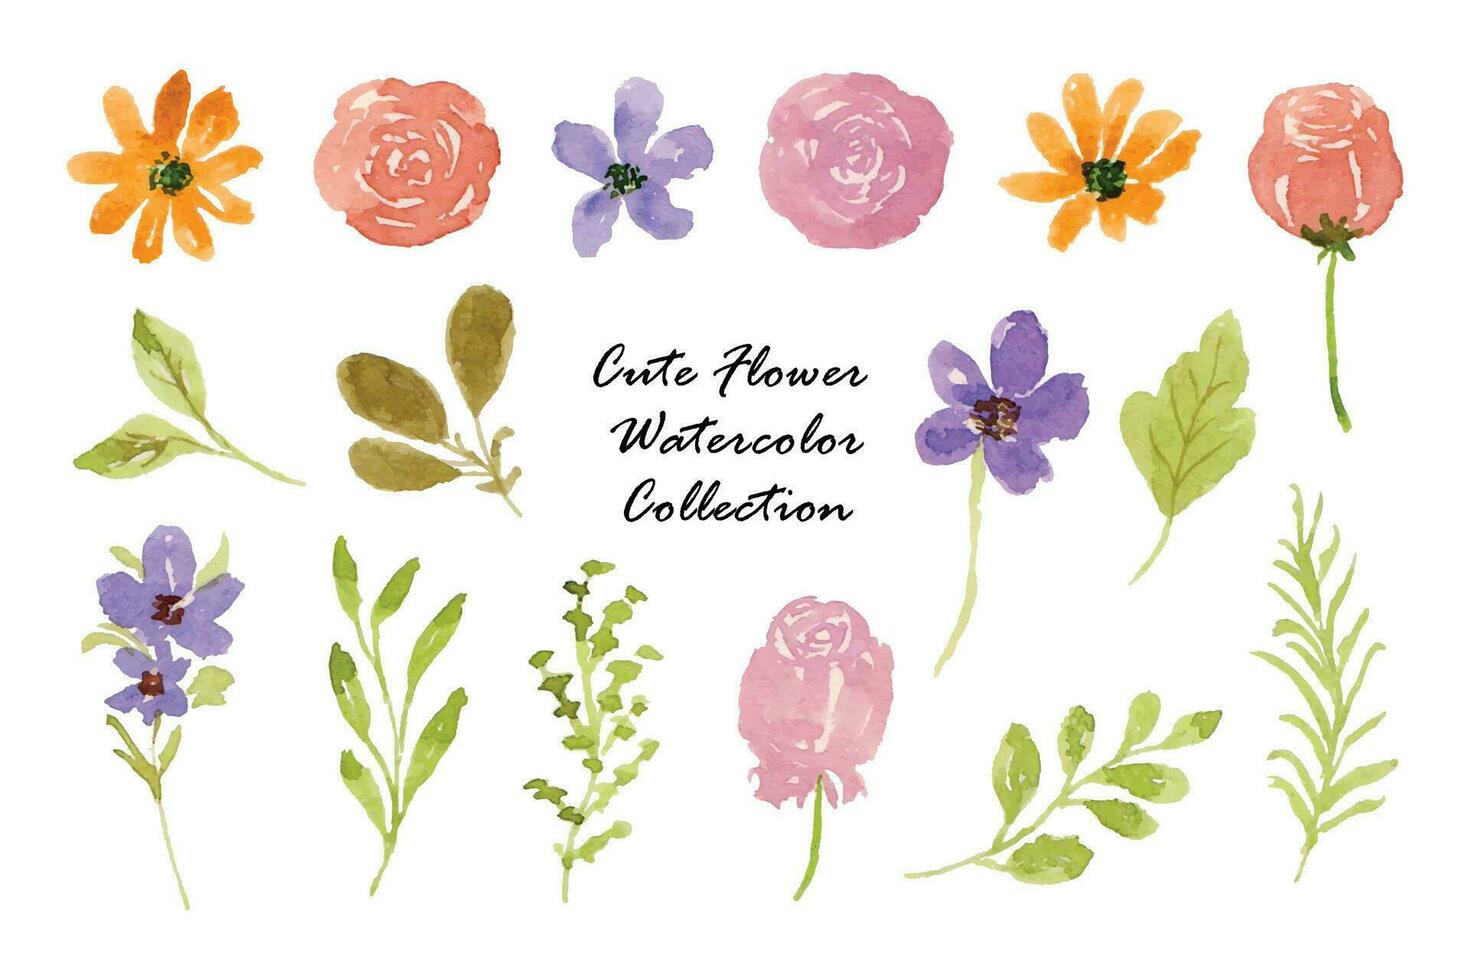 Beautiful Flower and Leaf Watercolor Collection vector